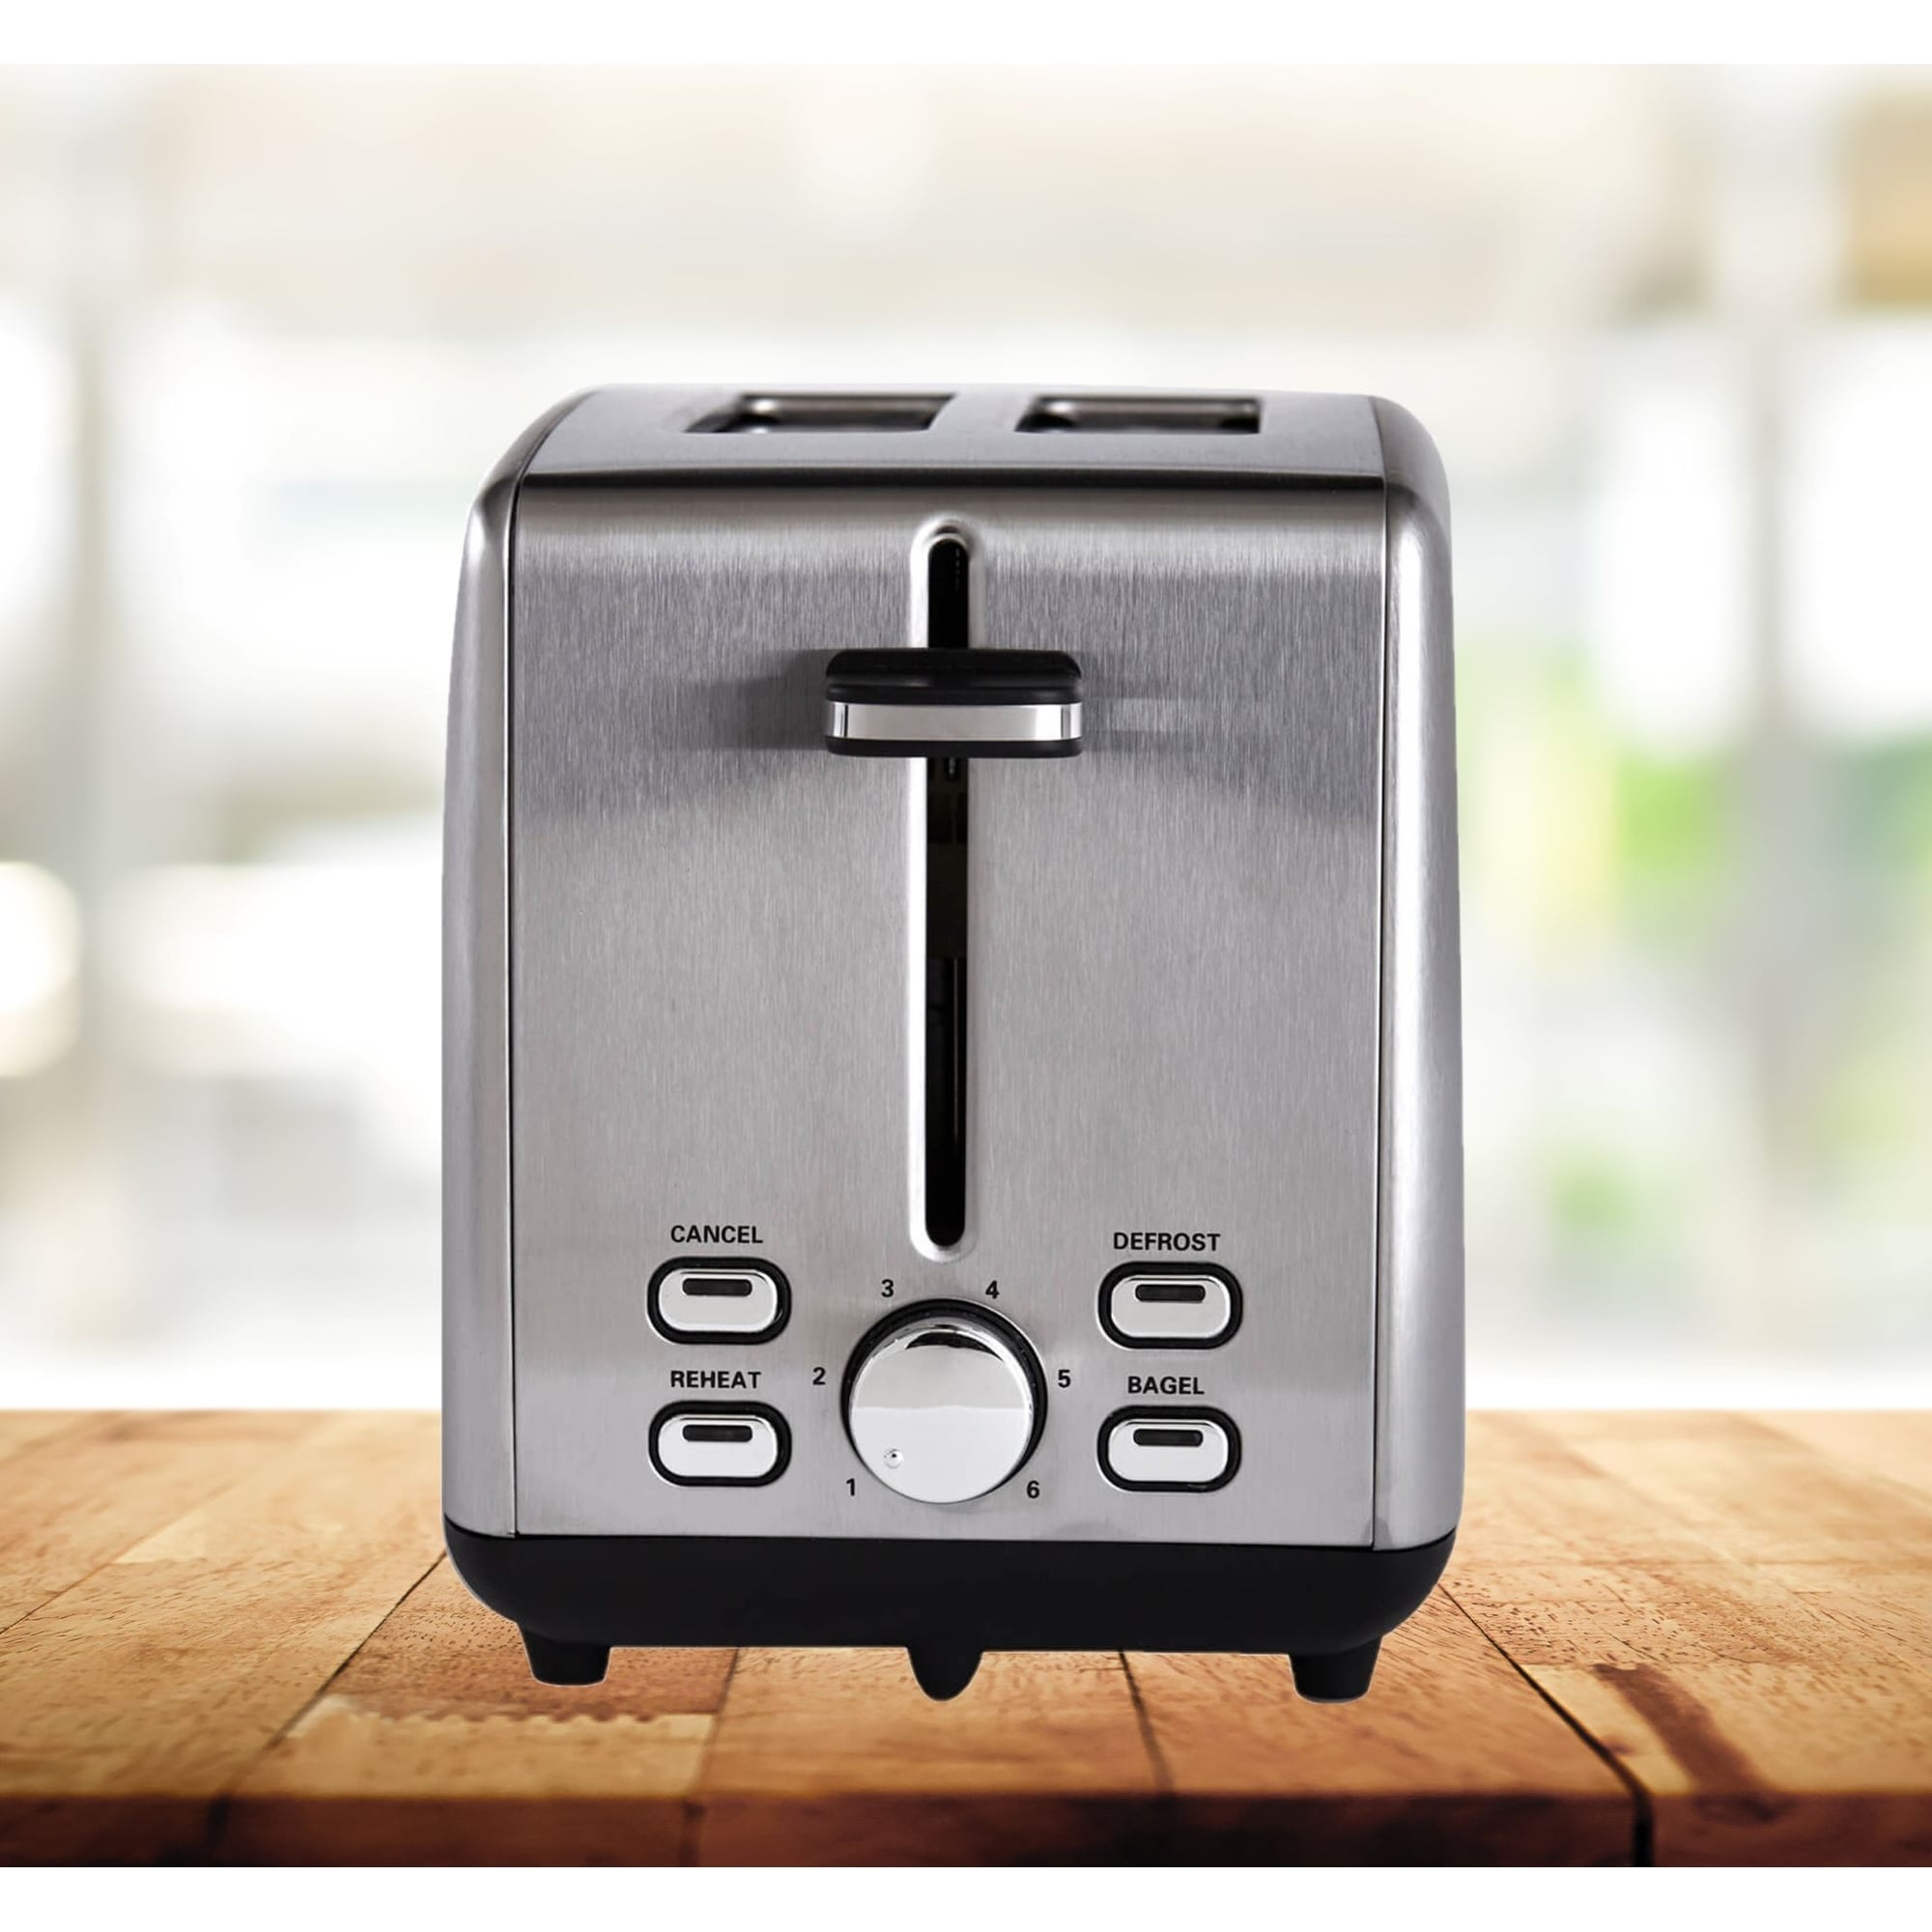 Toaster 4 Slice, Long Slot Toaster 2 Slice, Extra-Wide Stainless